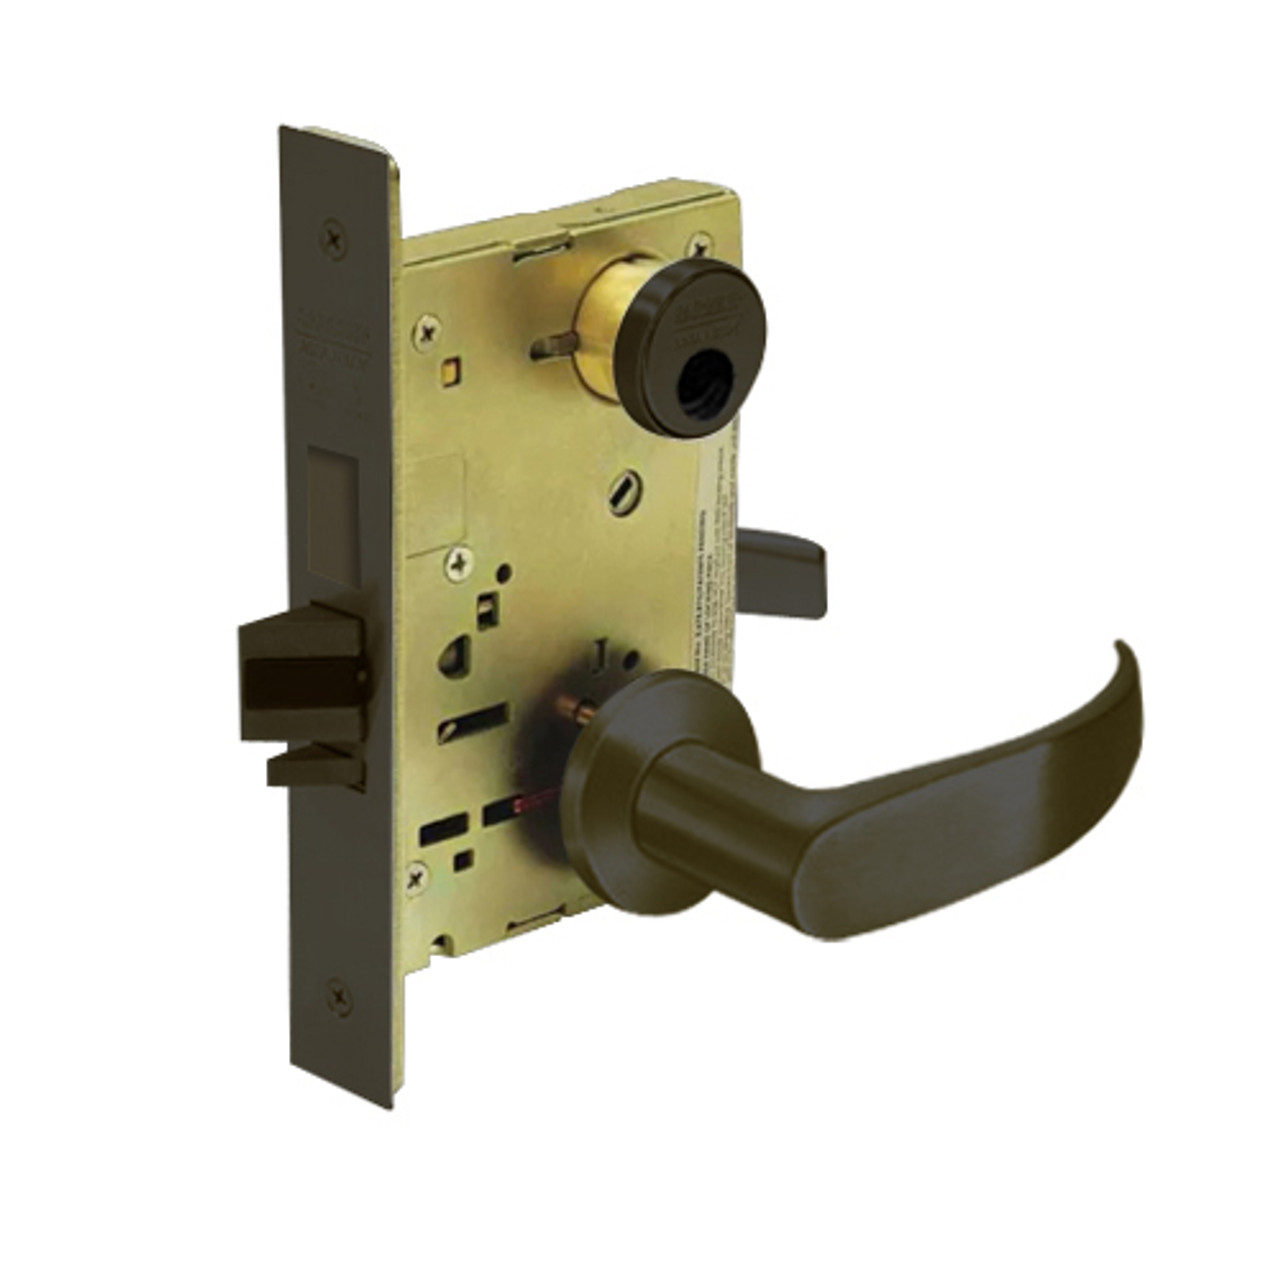 LC-8243-LNP-10B Sargent 8200 Series Apartment Corridor Mortise Lock with LNP Lever Trim and Deadbolt in Oxidized Dull Bronze